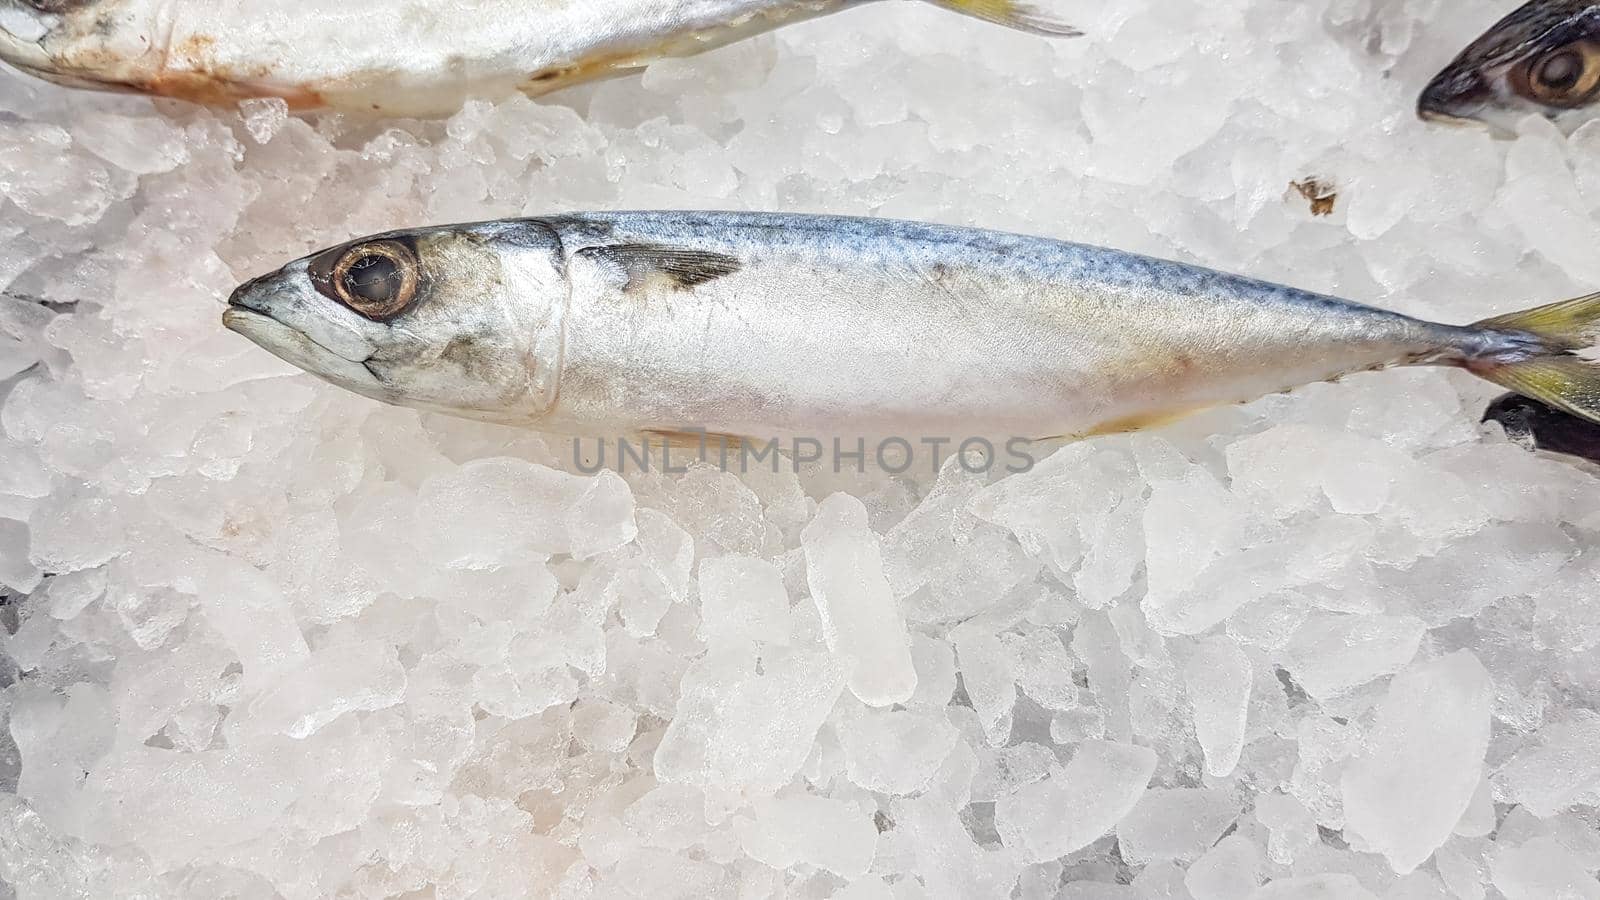 Sardines frozen in ice to keep them fresh for sale to customers in a store. by pichai25